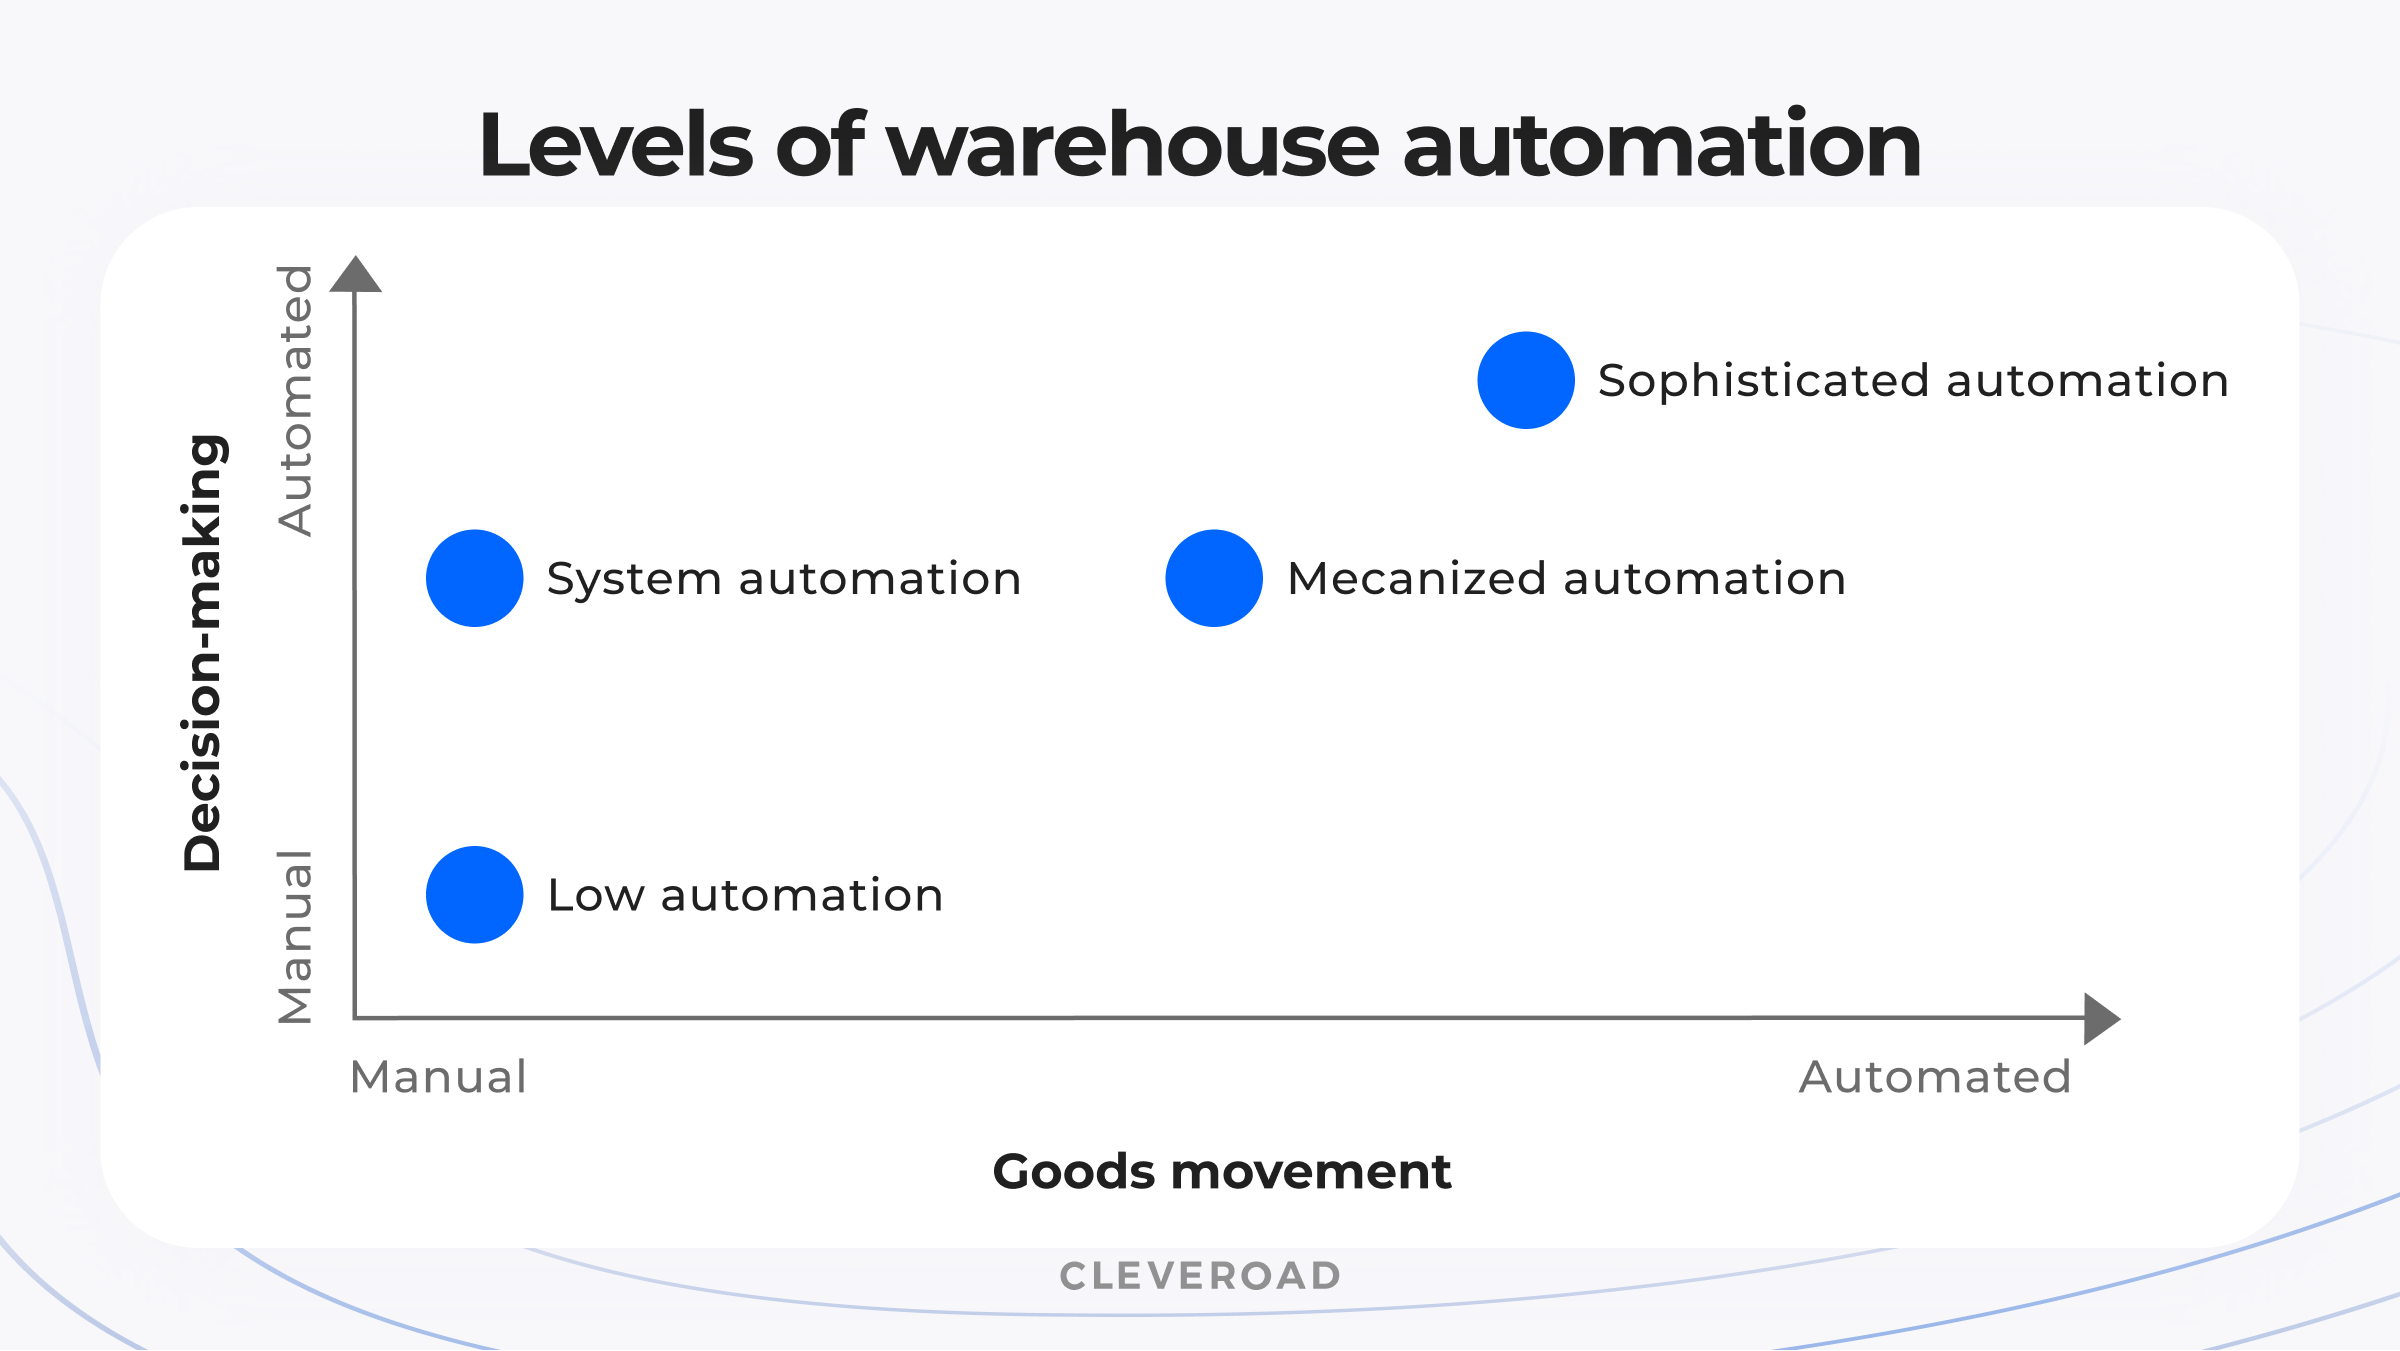 Warehouse automation by levels